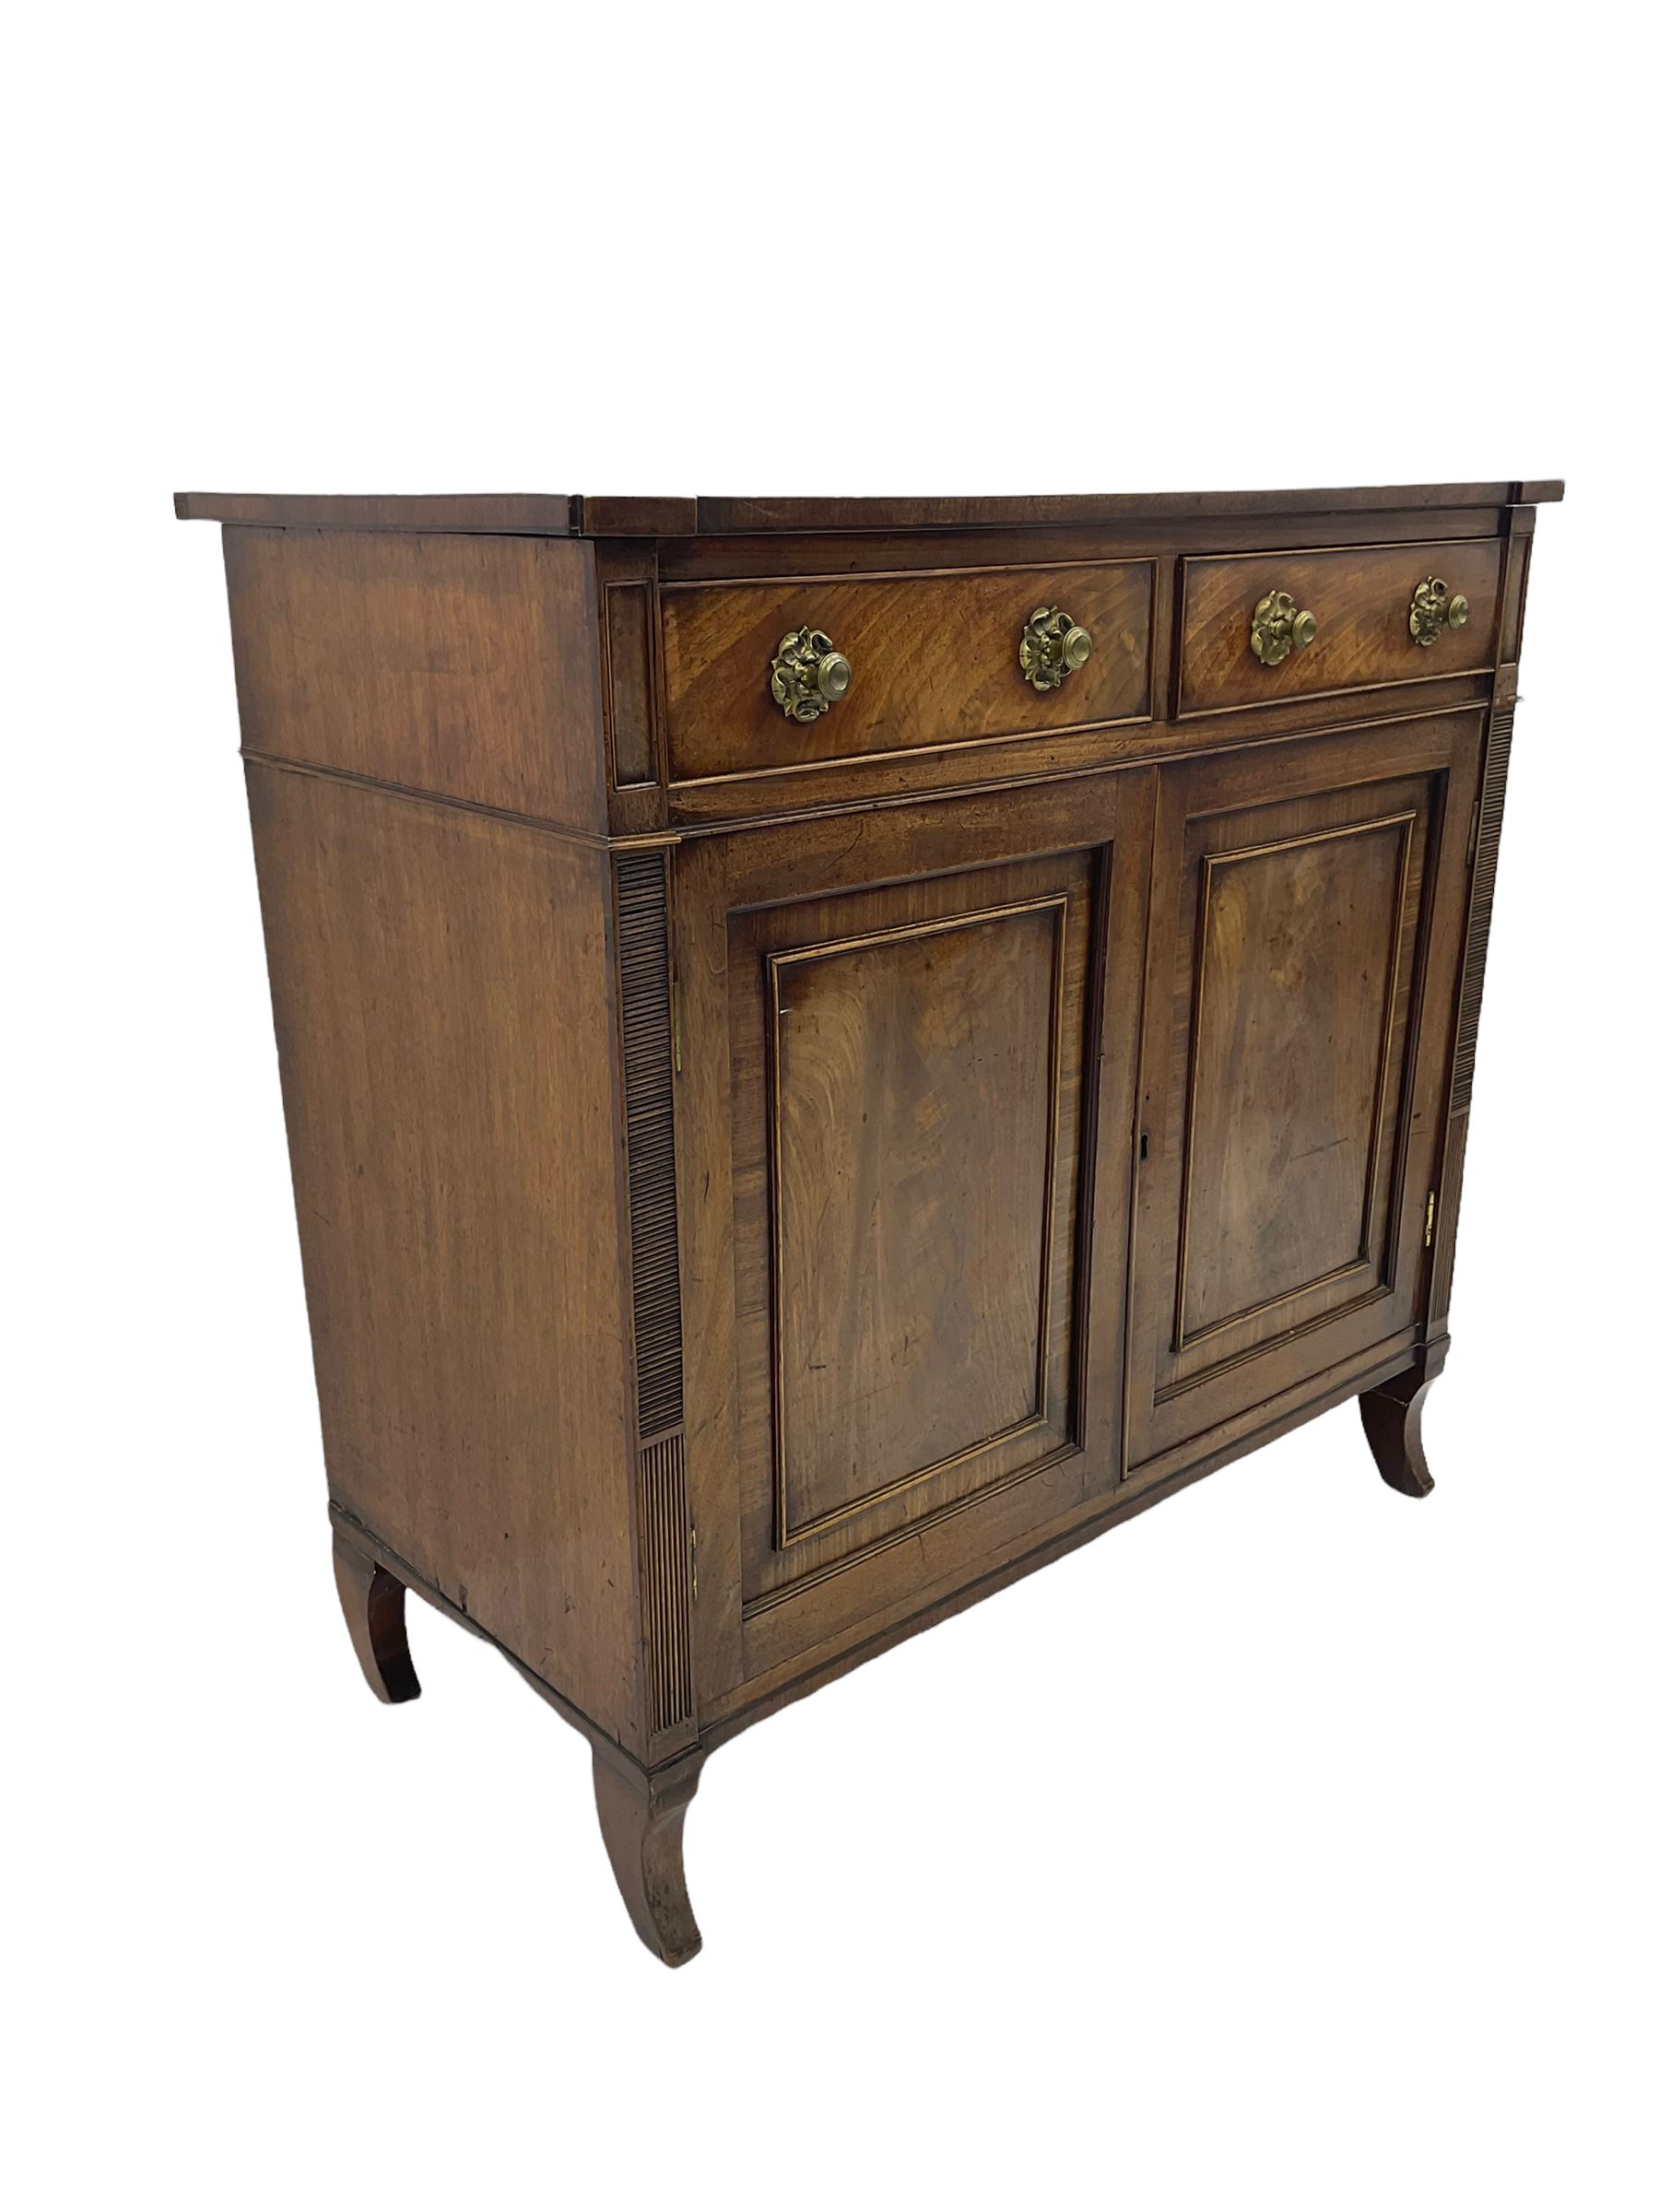 Regency period mahogany side cabinet - Image 6 of 10